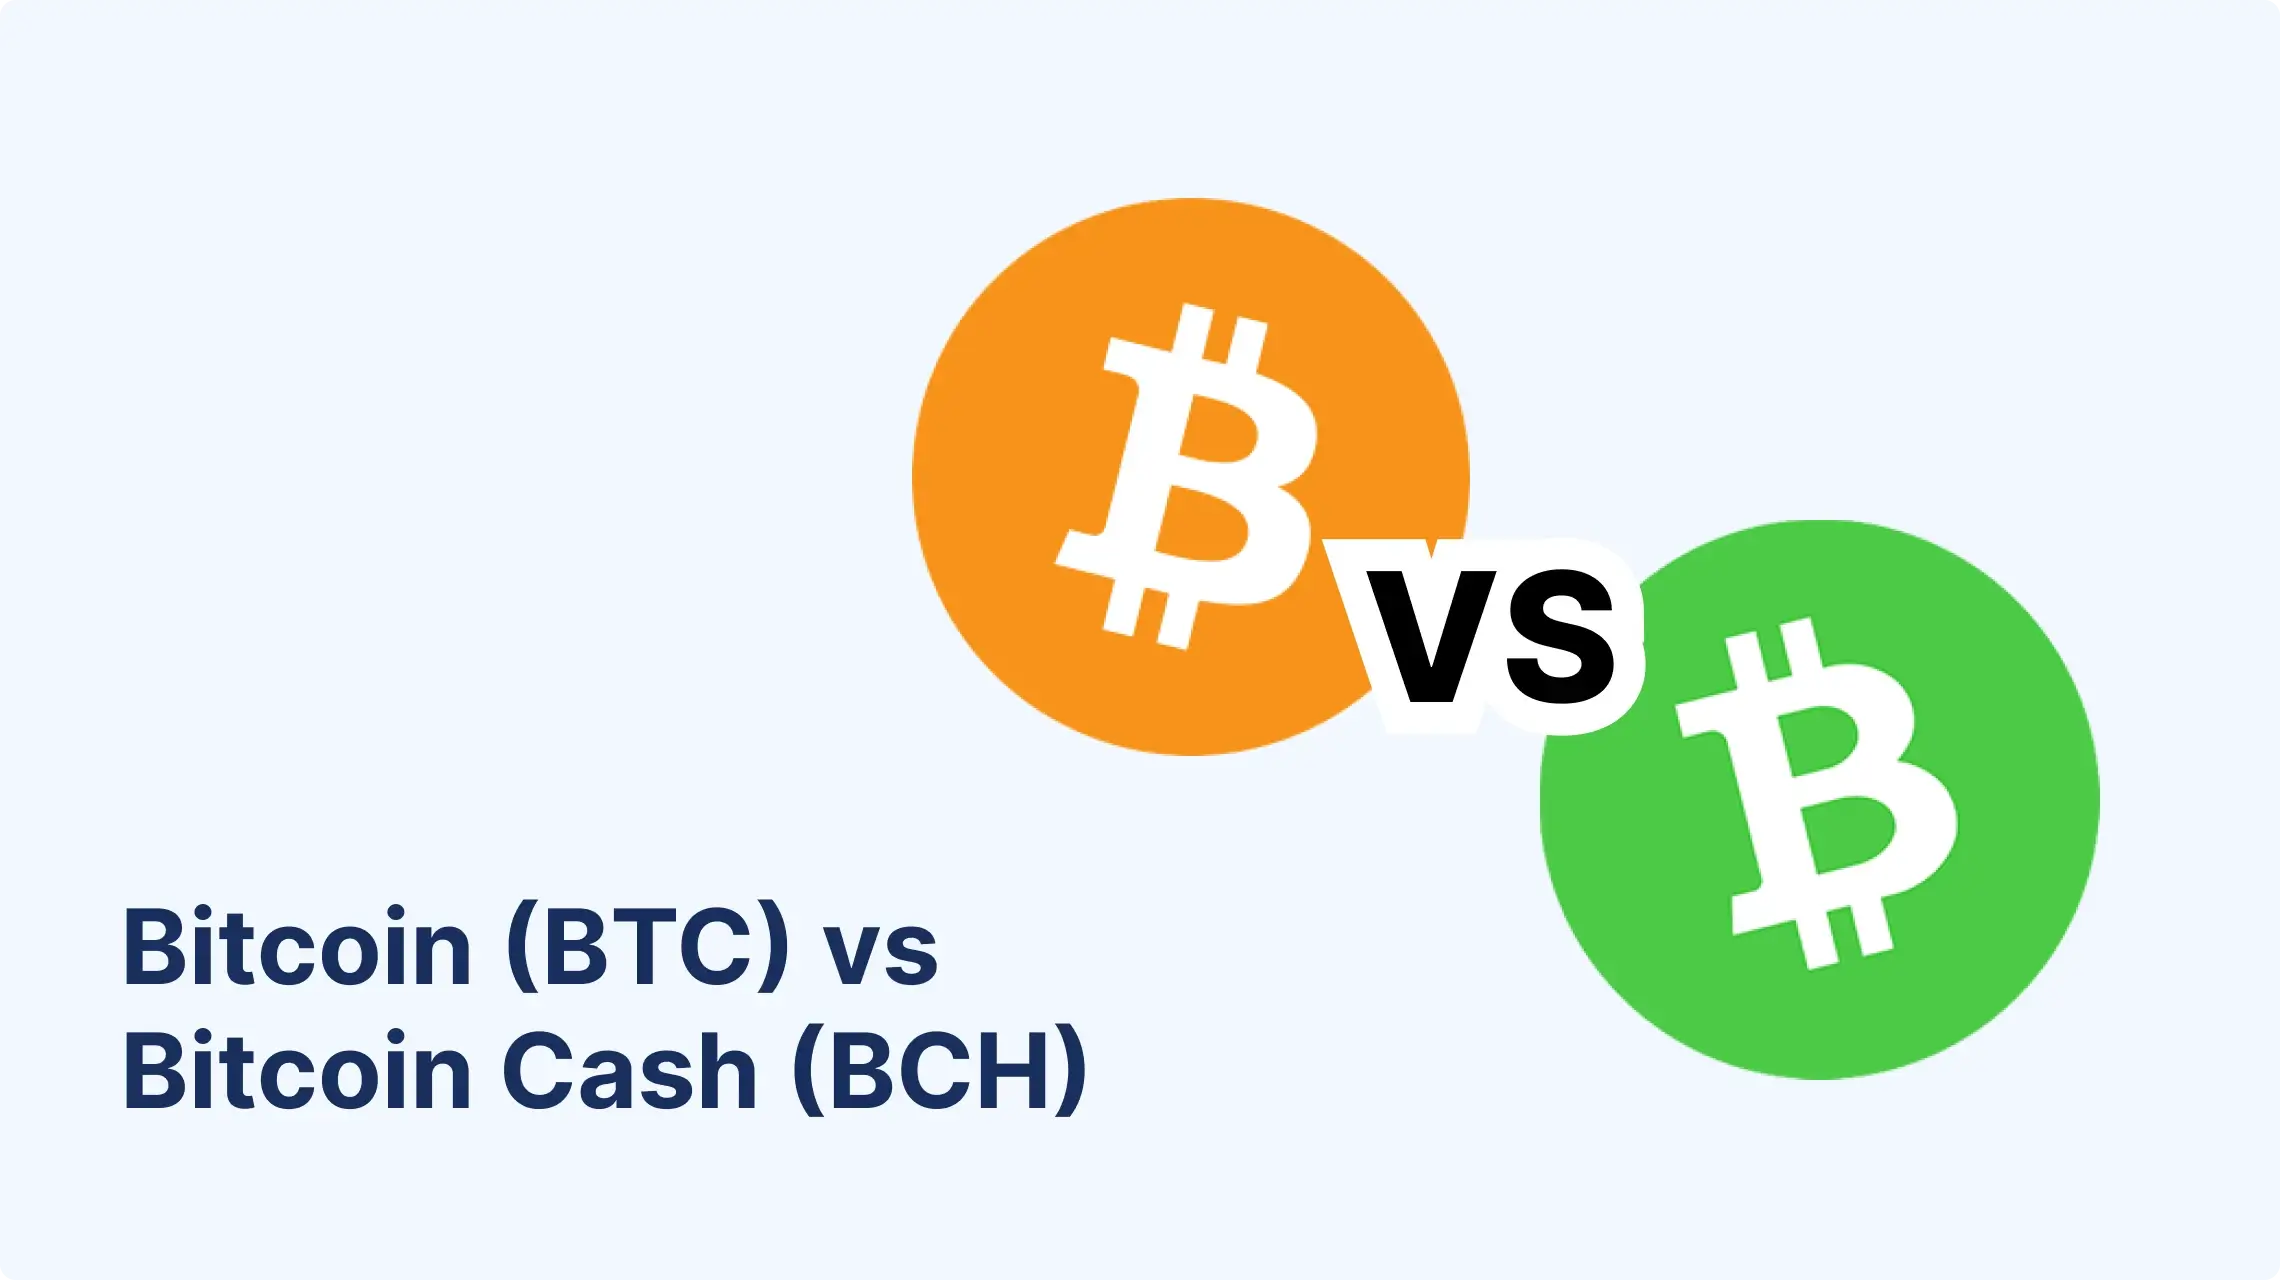 BTC vs. BCH vs. BSV: What Is The Difference? | Swaps app